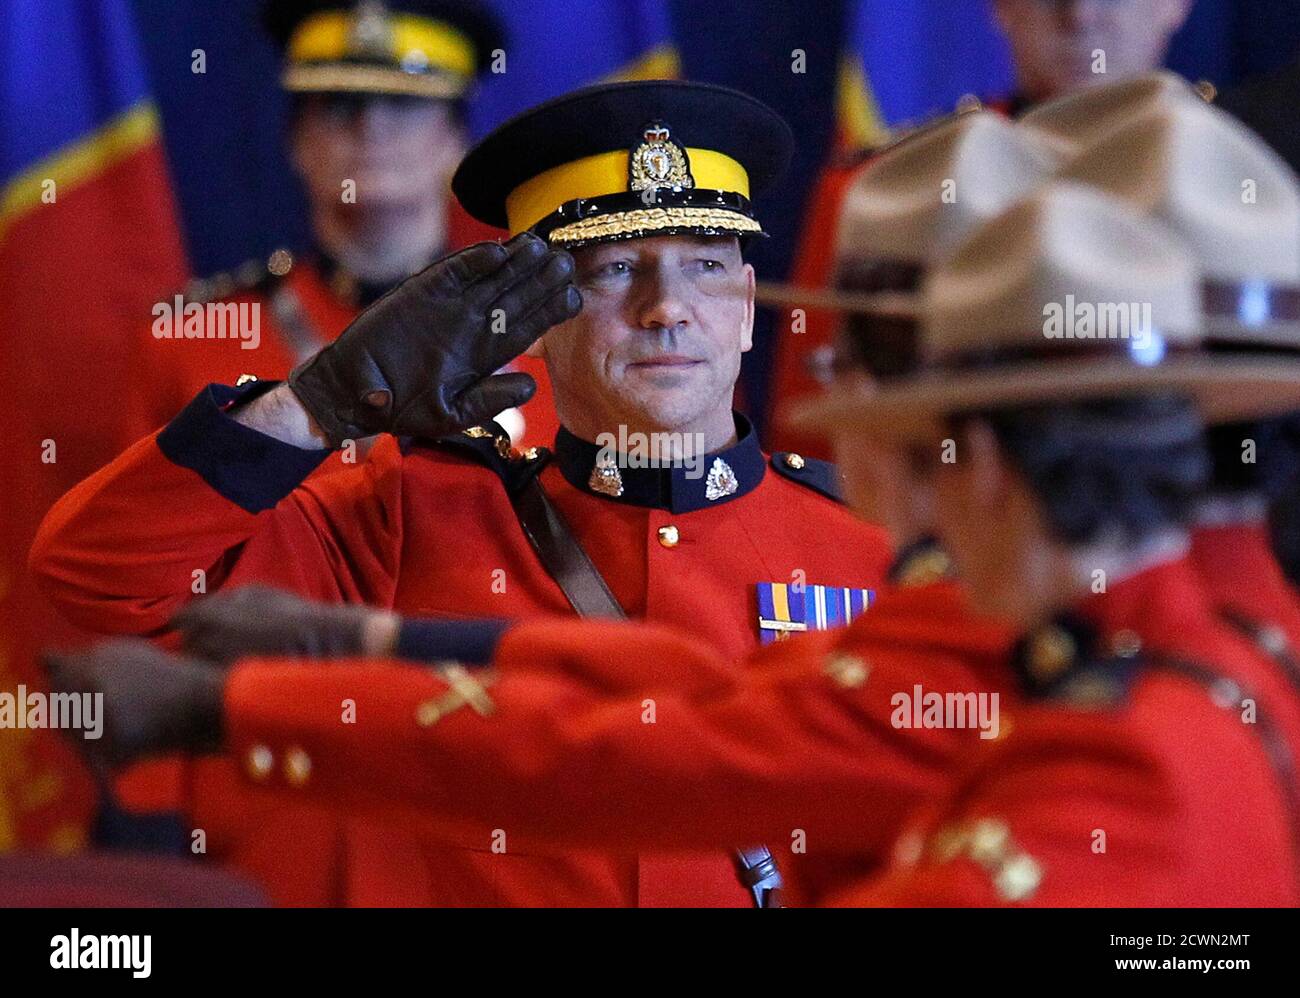 New Royal Canadian Mounted Police Commissioner Bob Paulson salutes during a change of command ceremony in Ottawa December 8, 2011.    REUTERS/Chris Wattie    (CANADA - Tags: POLITICS MILITARY) Stock Photo